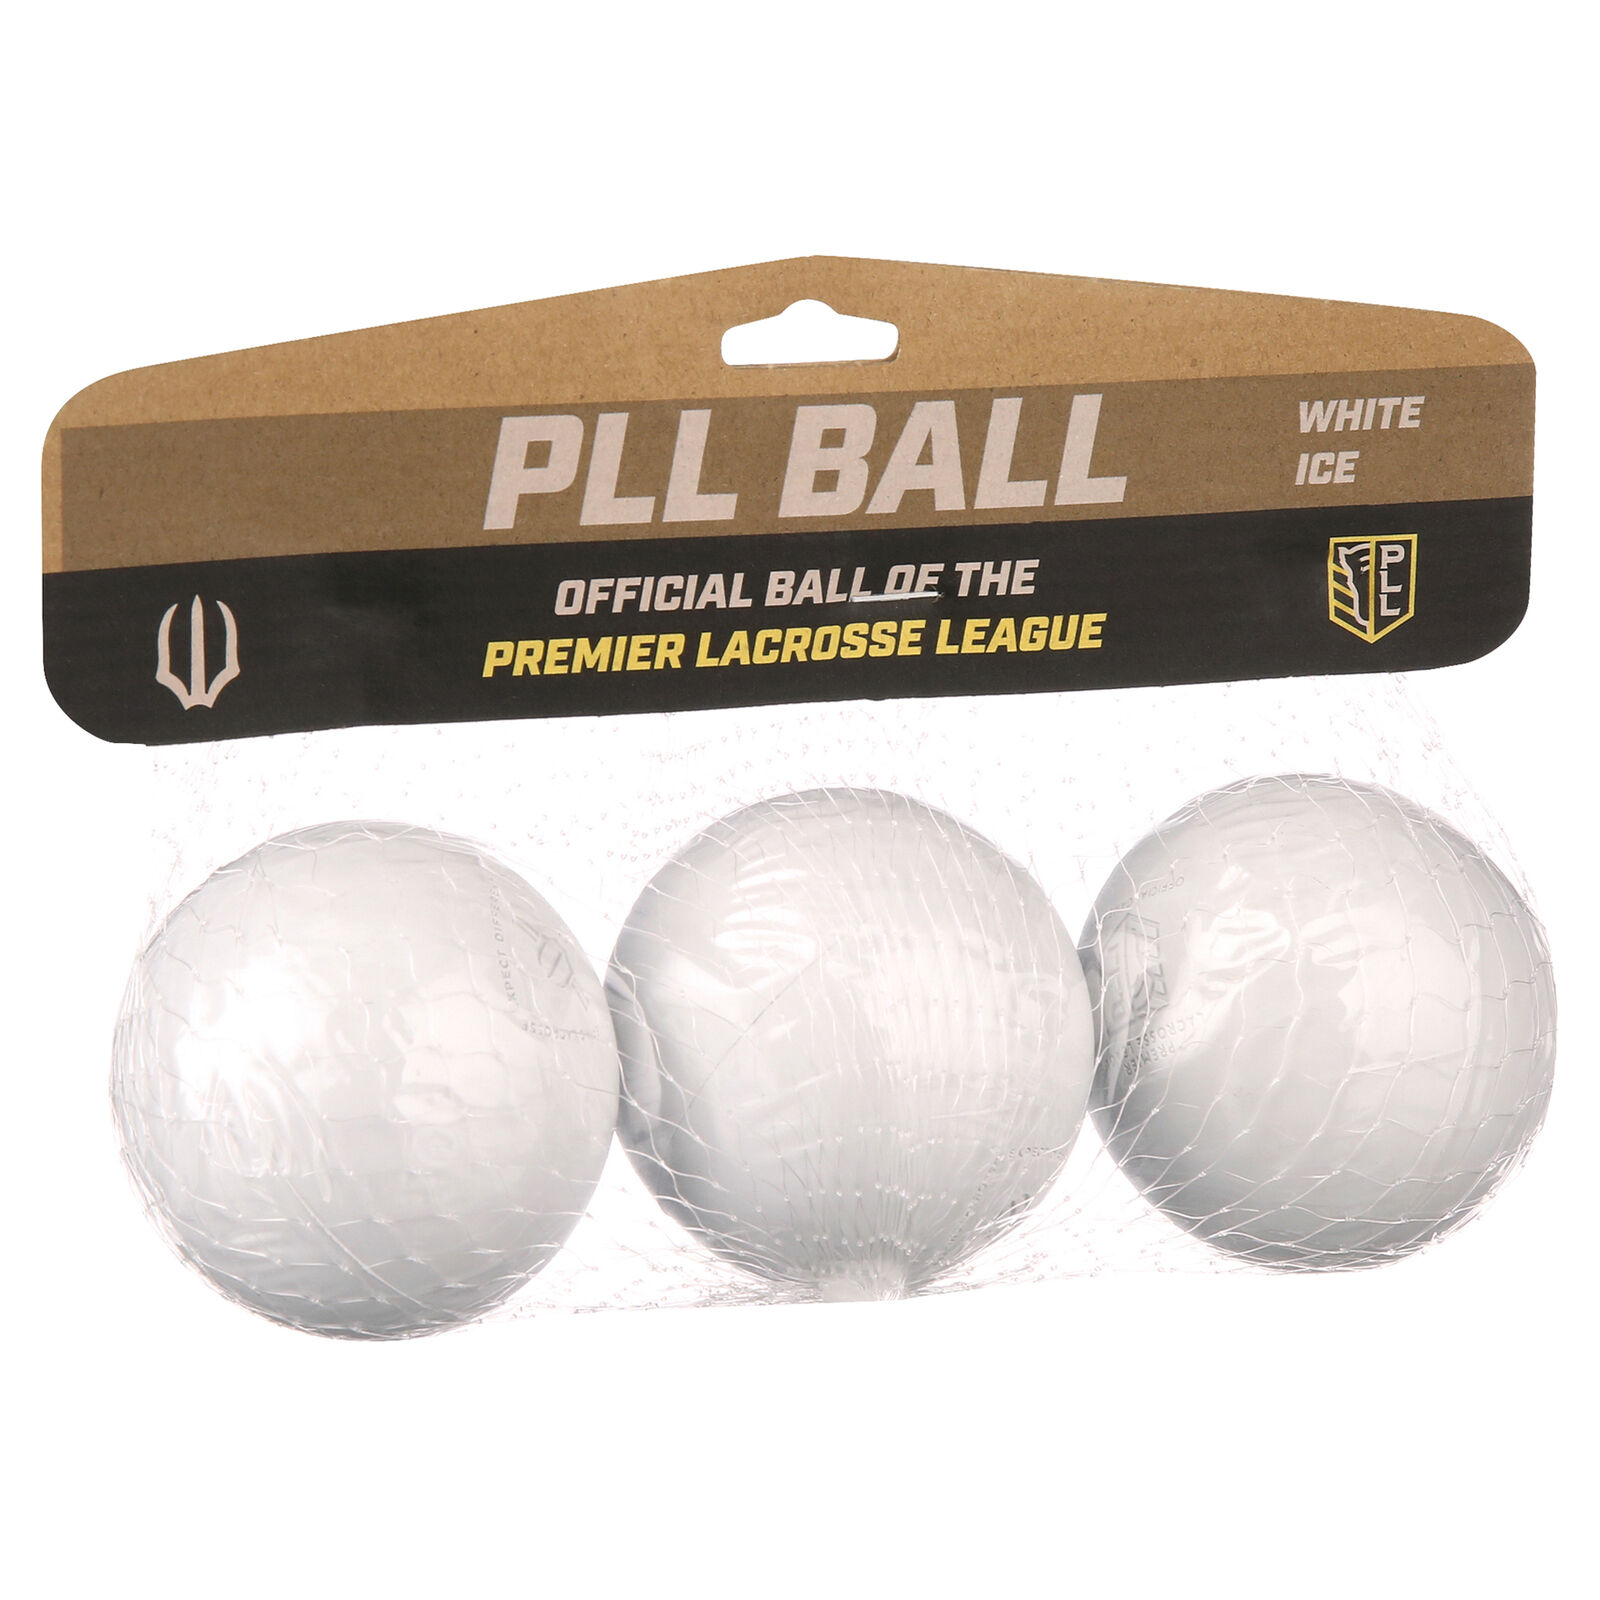 New - Wolf Athletics White Ice Lacrosse Ball - 3 Pack